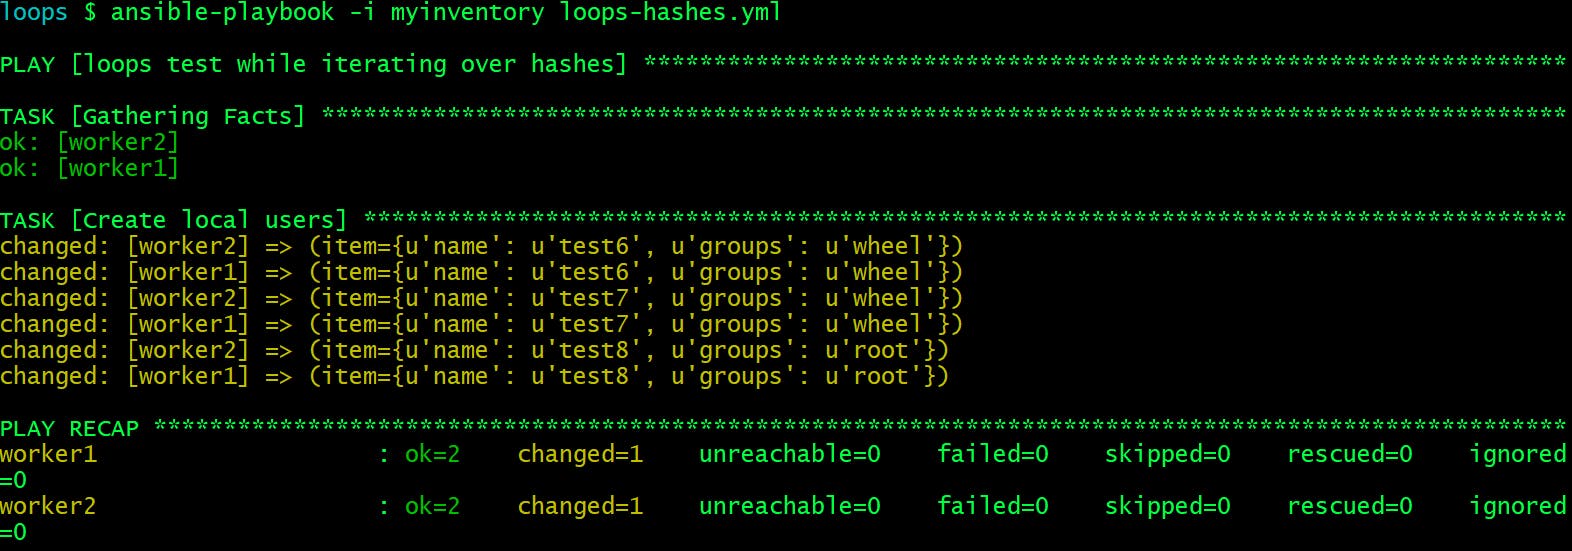 looping-over-hashes.png